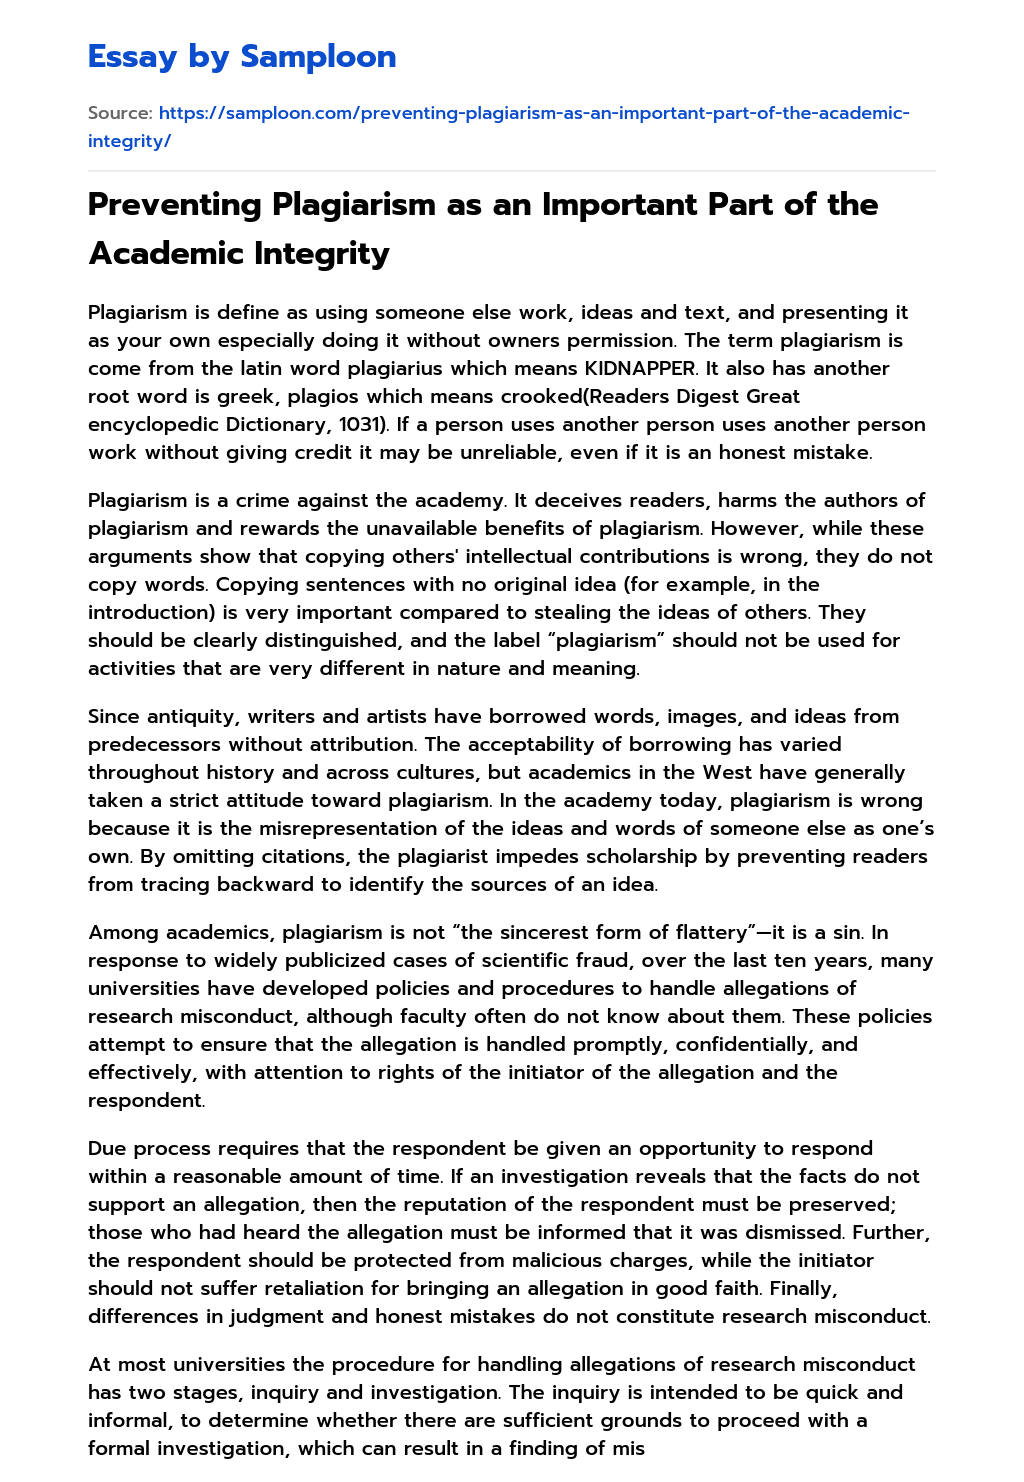 Preventing Plagiarism as an Important Part of the Academic Integrity essay